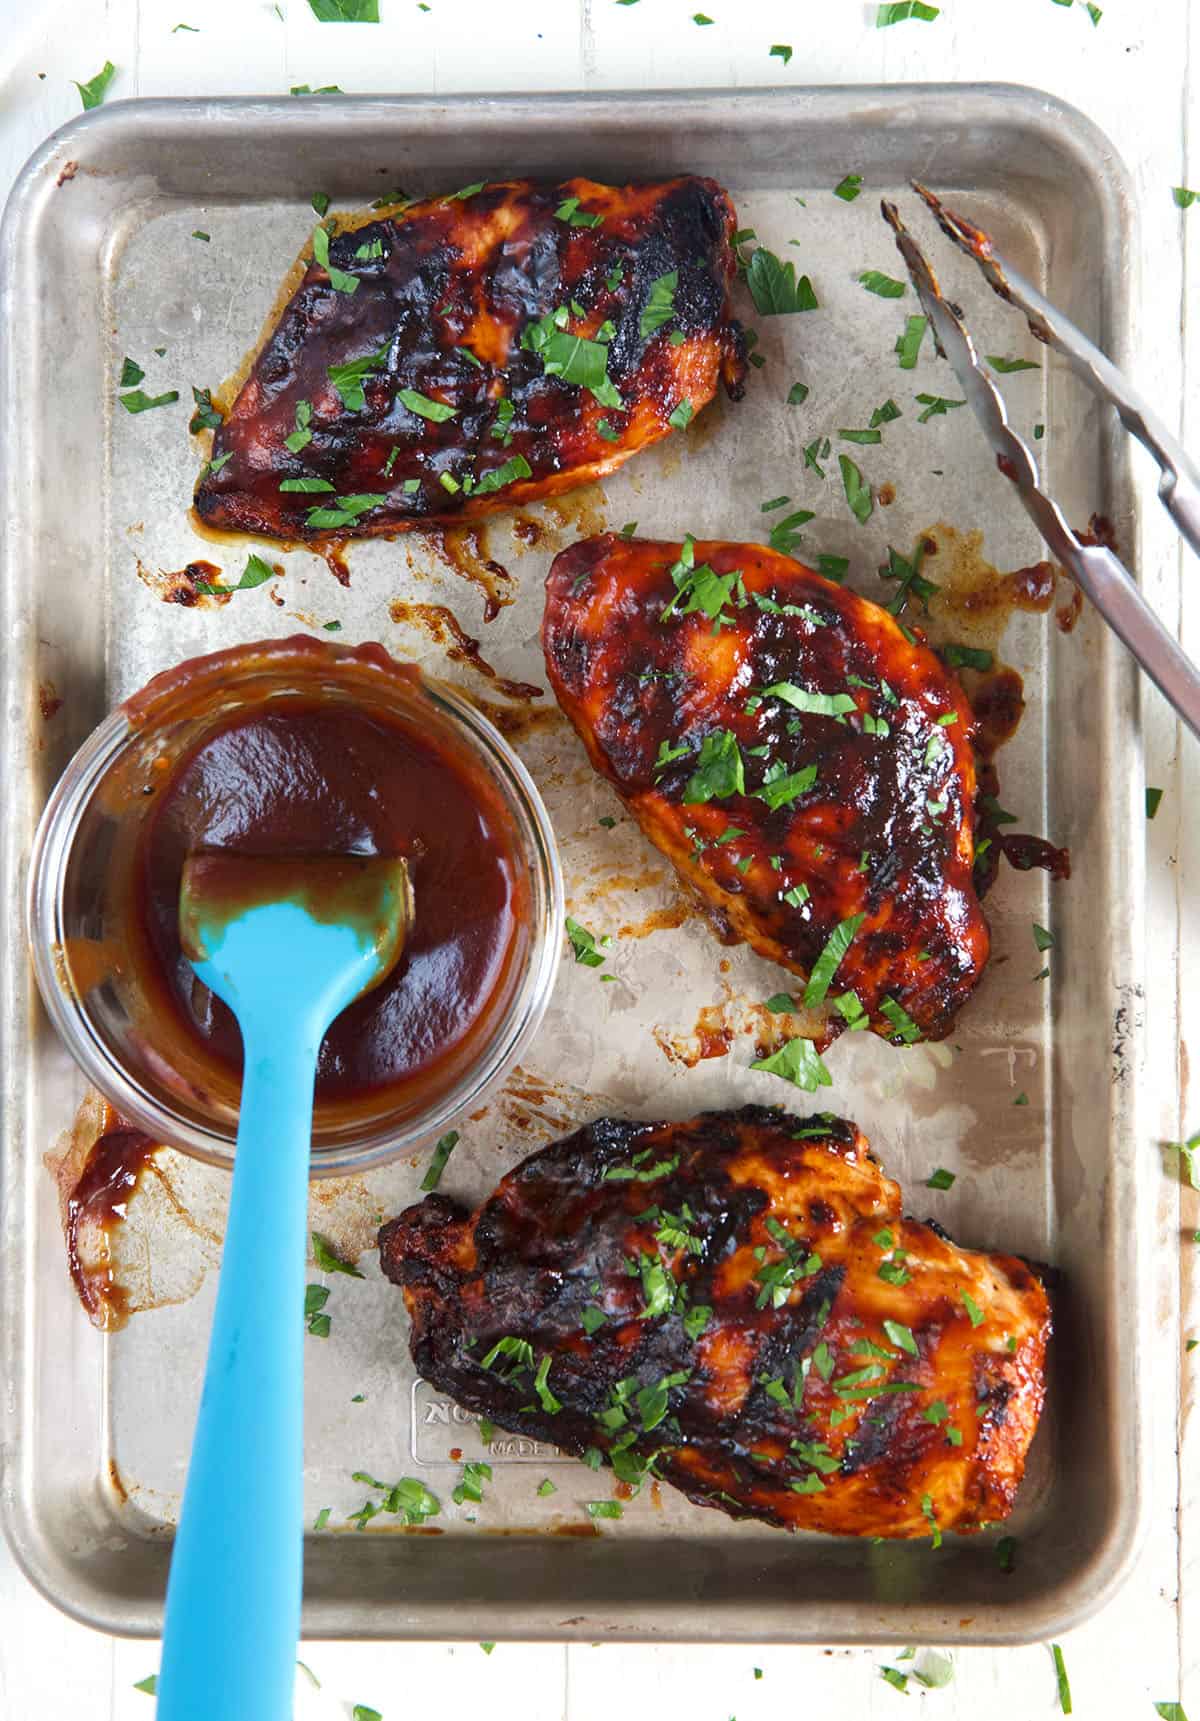 Three chicken breasts are placed next to a small bowl of extra BBQ sauce.